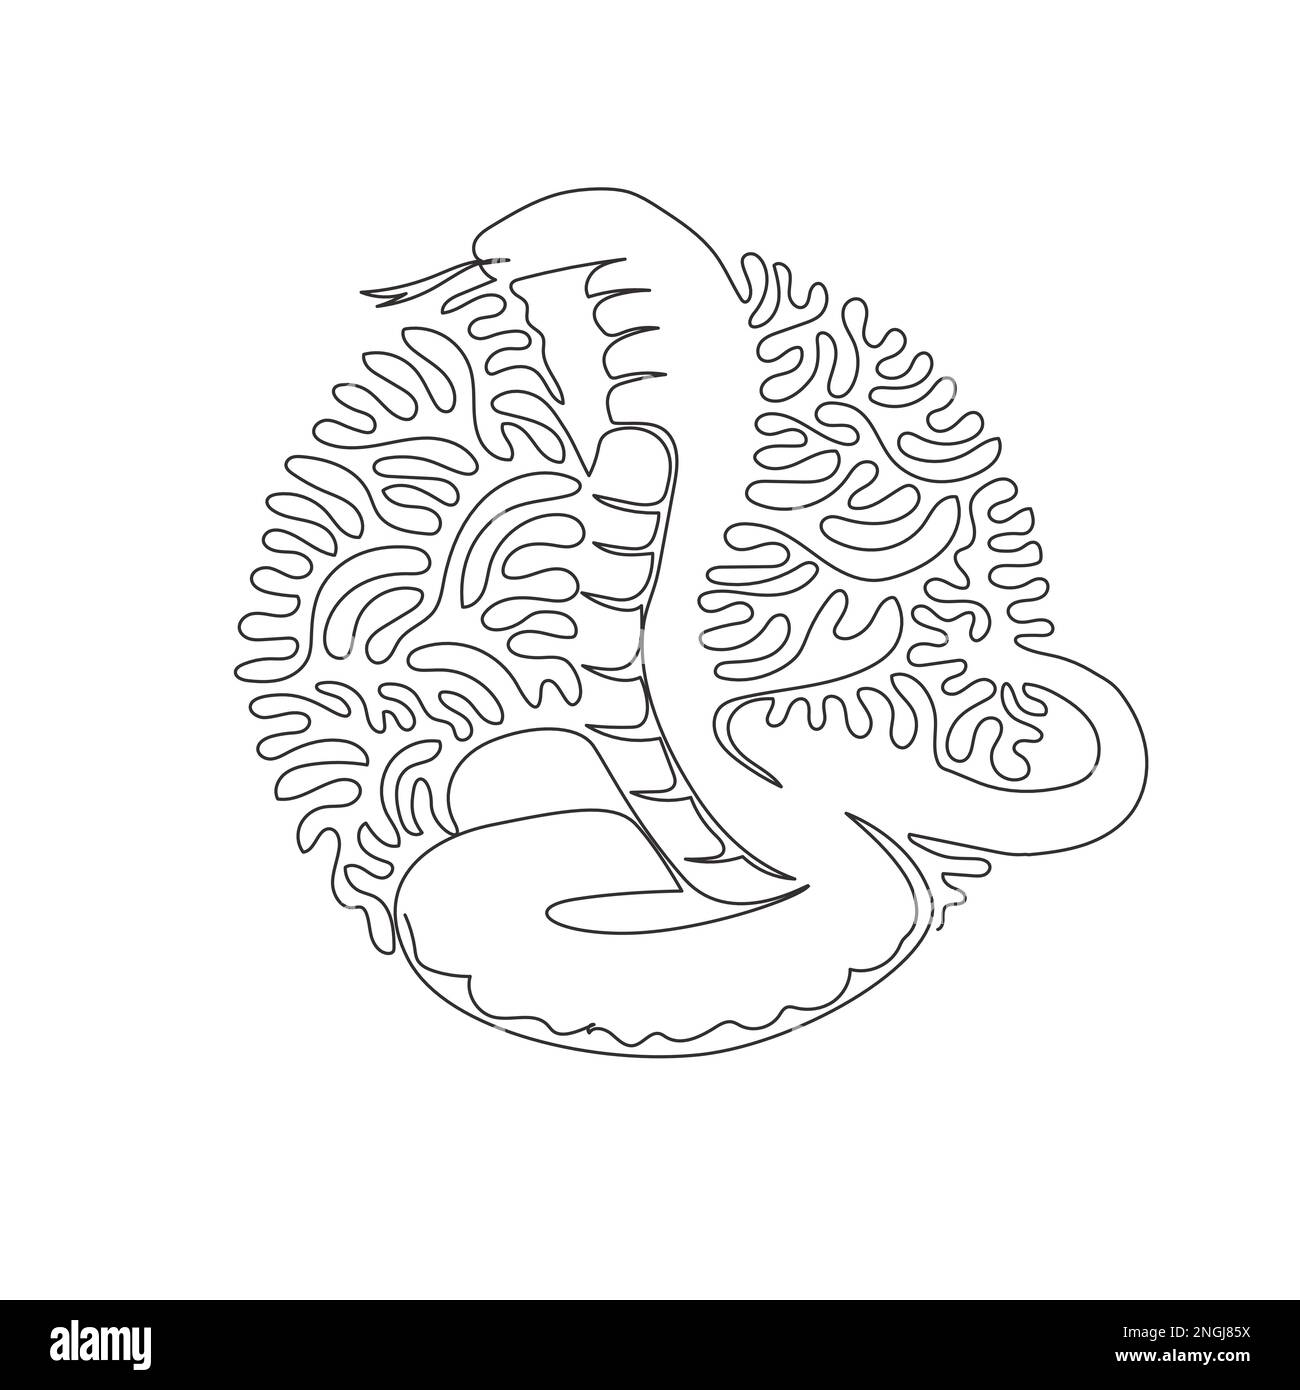 Continuous curve one line drawing of standing cobra abstract art. Single line editable stroke vector illustration of king cobra most venomous Stock Vector